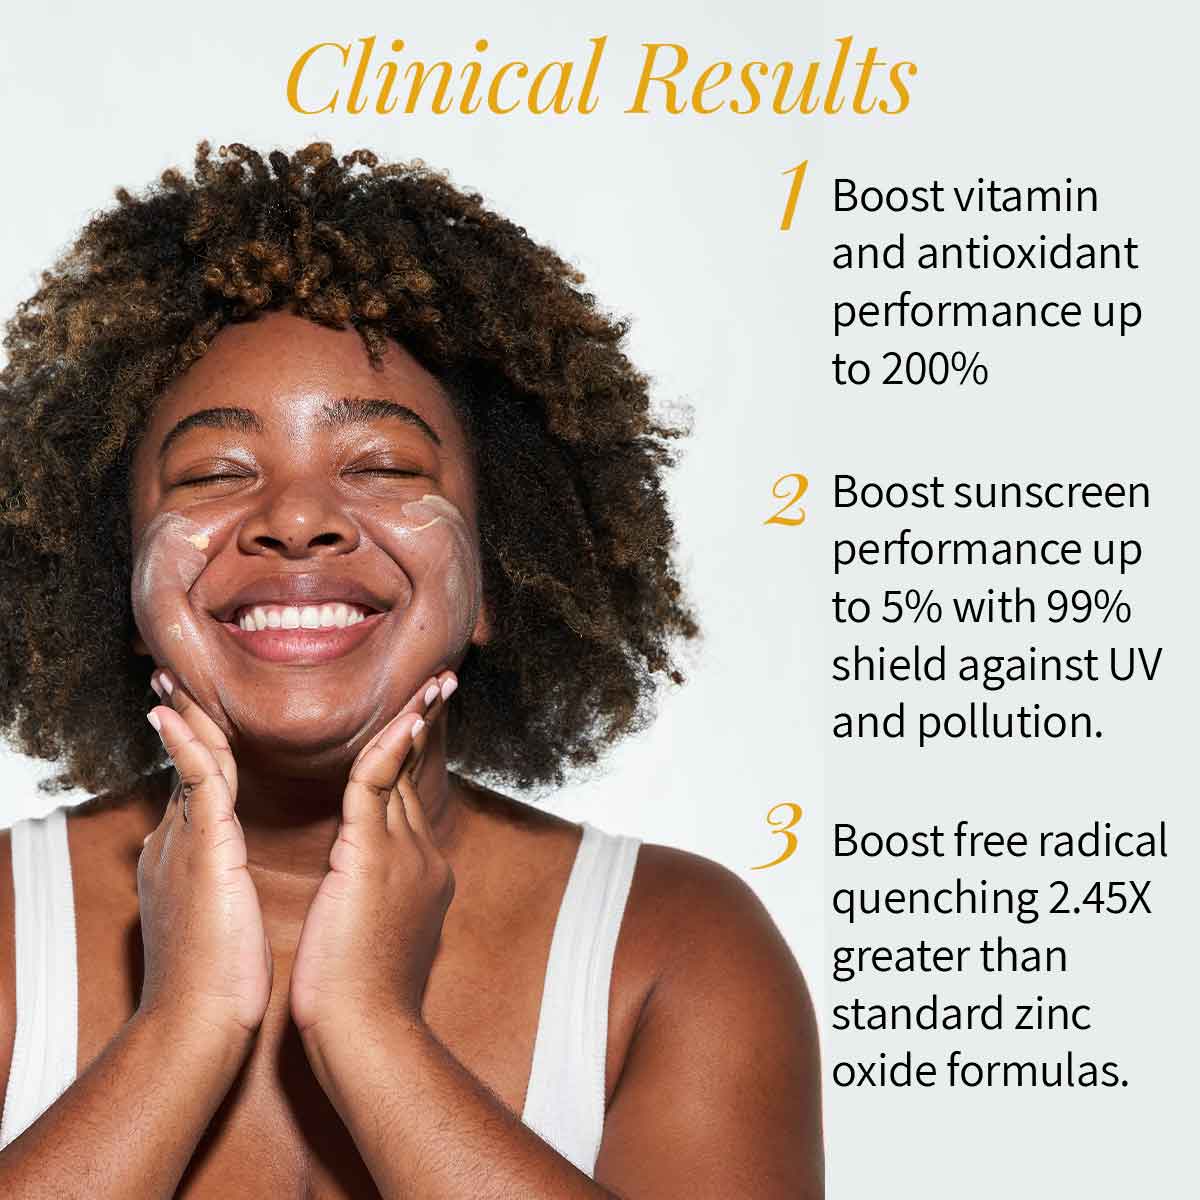 Clinical Results